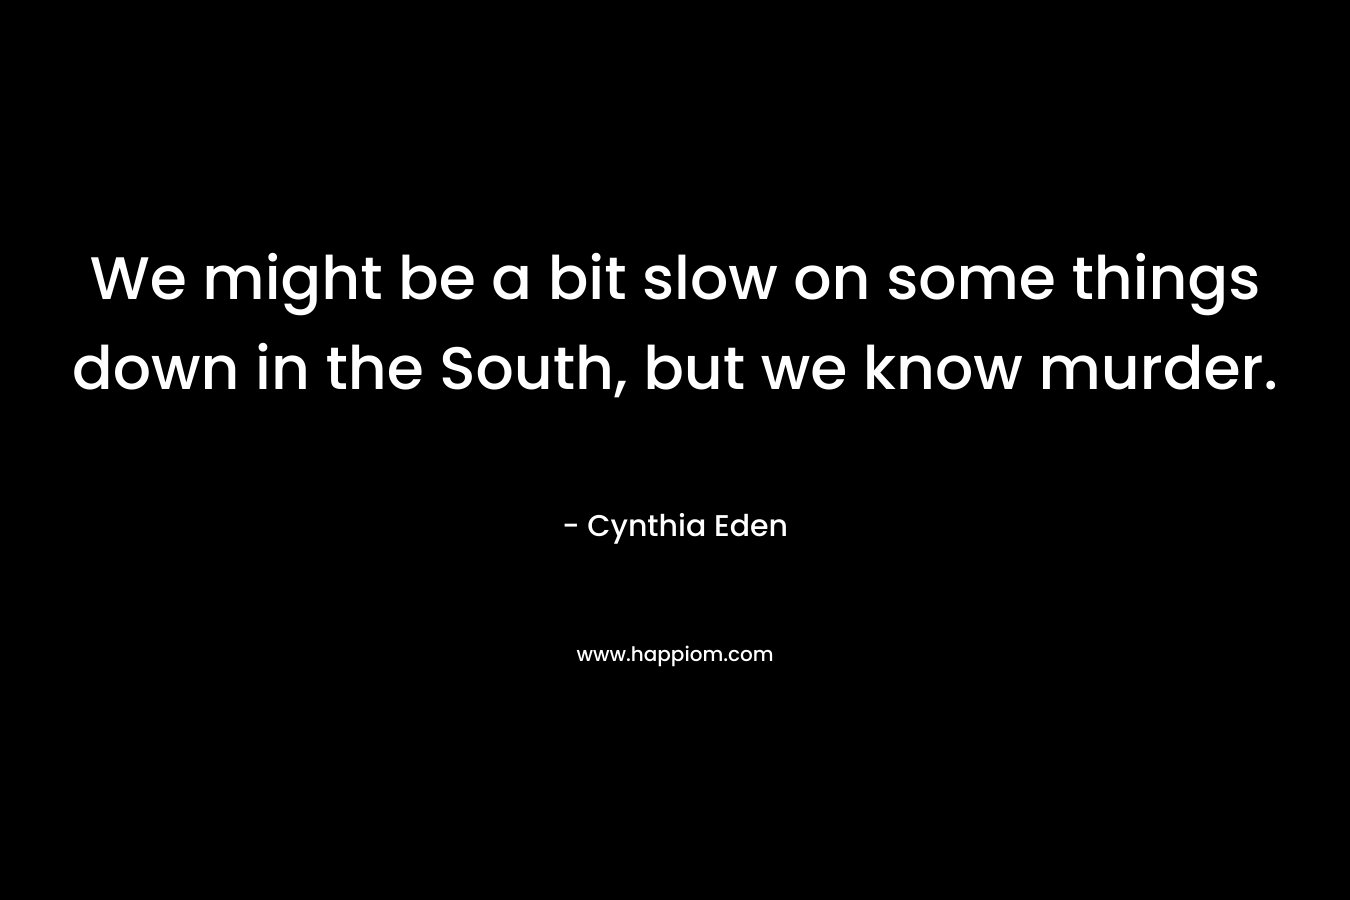 We might be a bit slow on some things down in the South, but we know murder. – Cynthia Eden